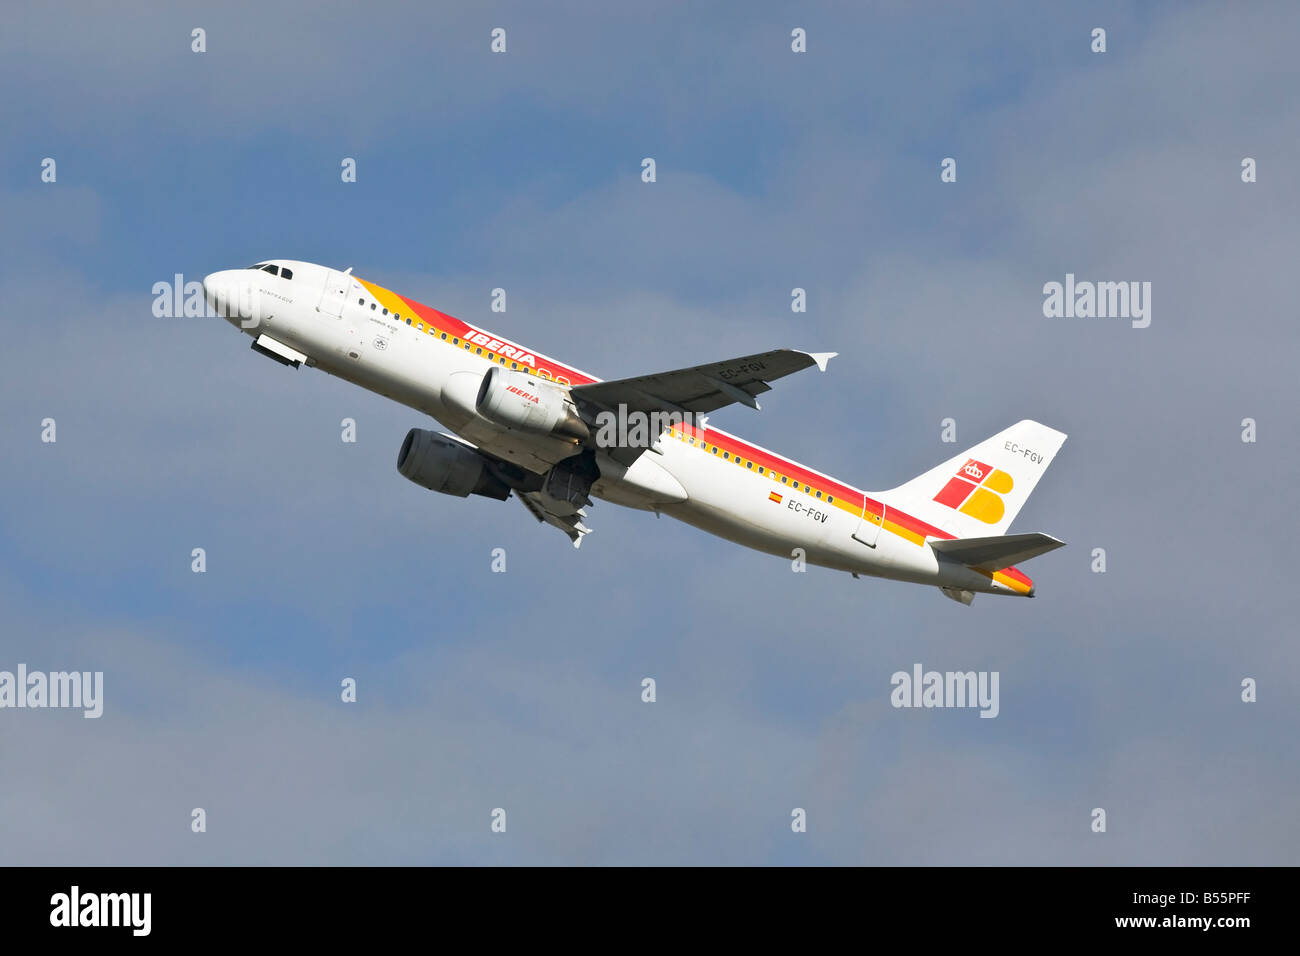 An Airbus A319 of the Spanish airline Iberia on departure Stock Photo